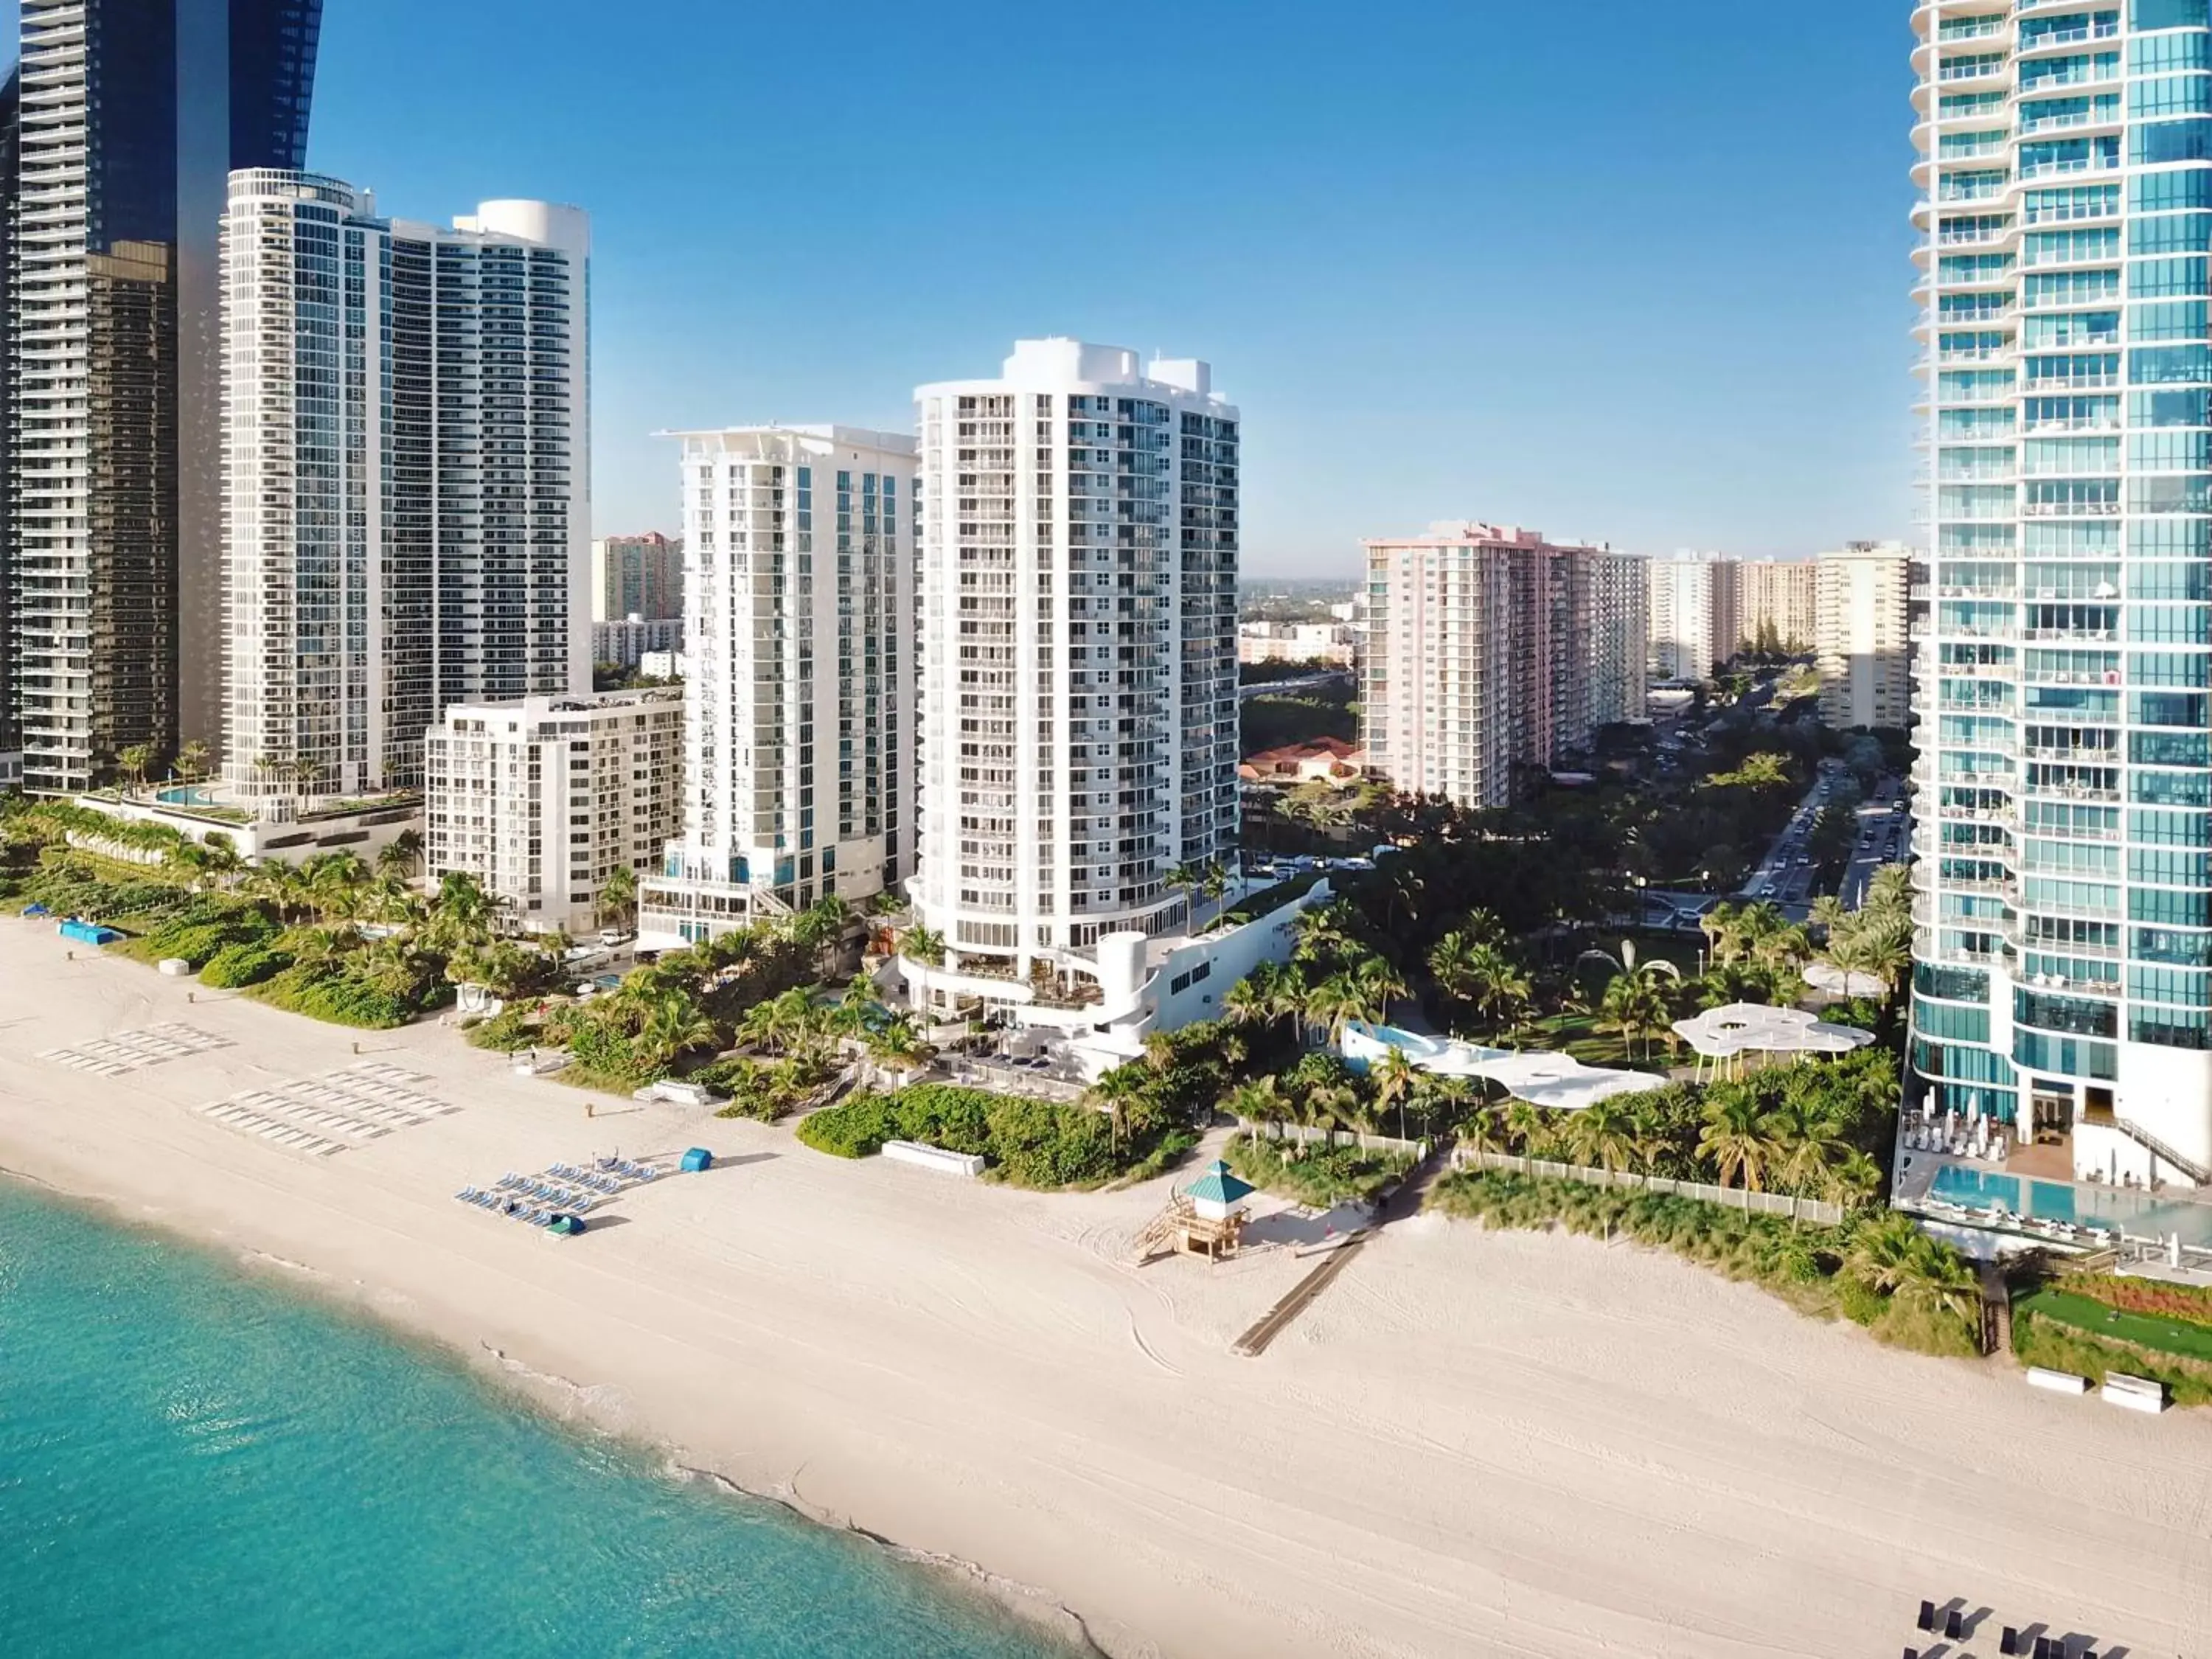 Property building, Bird's-eye View in DoubleTree by Hilton Ocean Point Resort - North Miami Beach